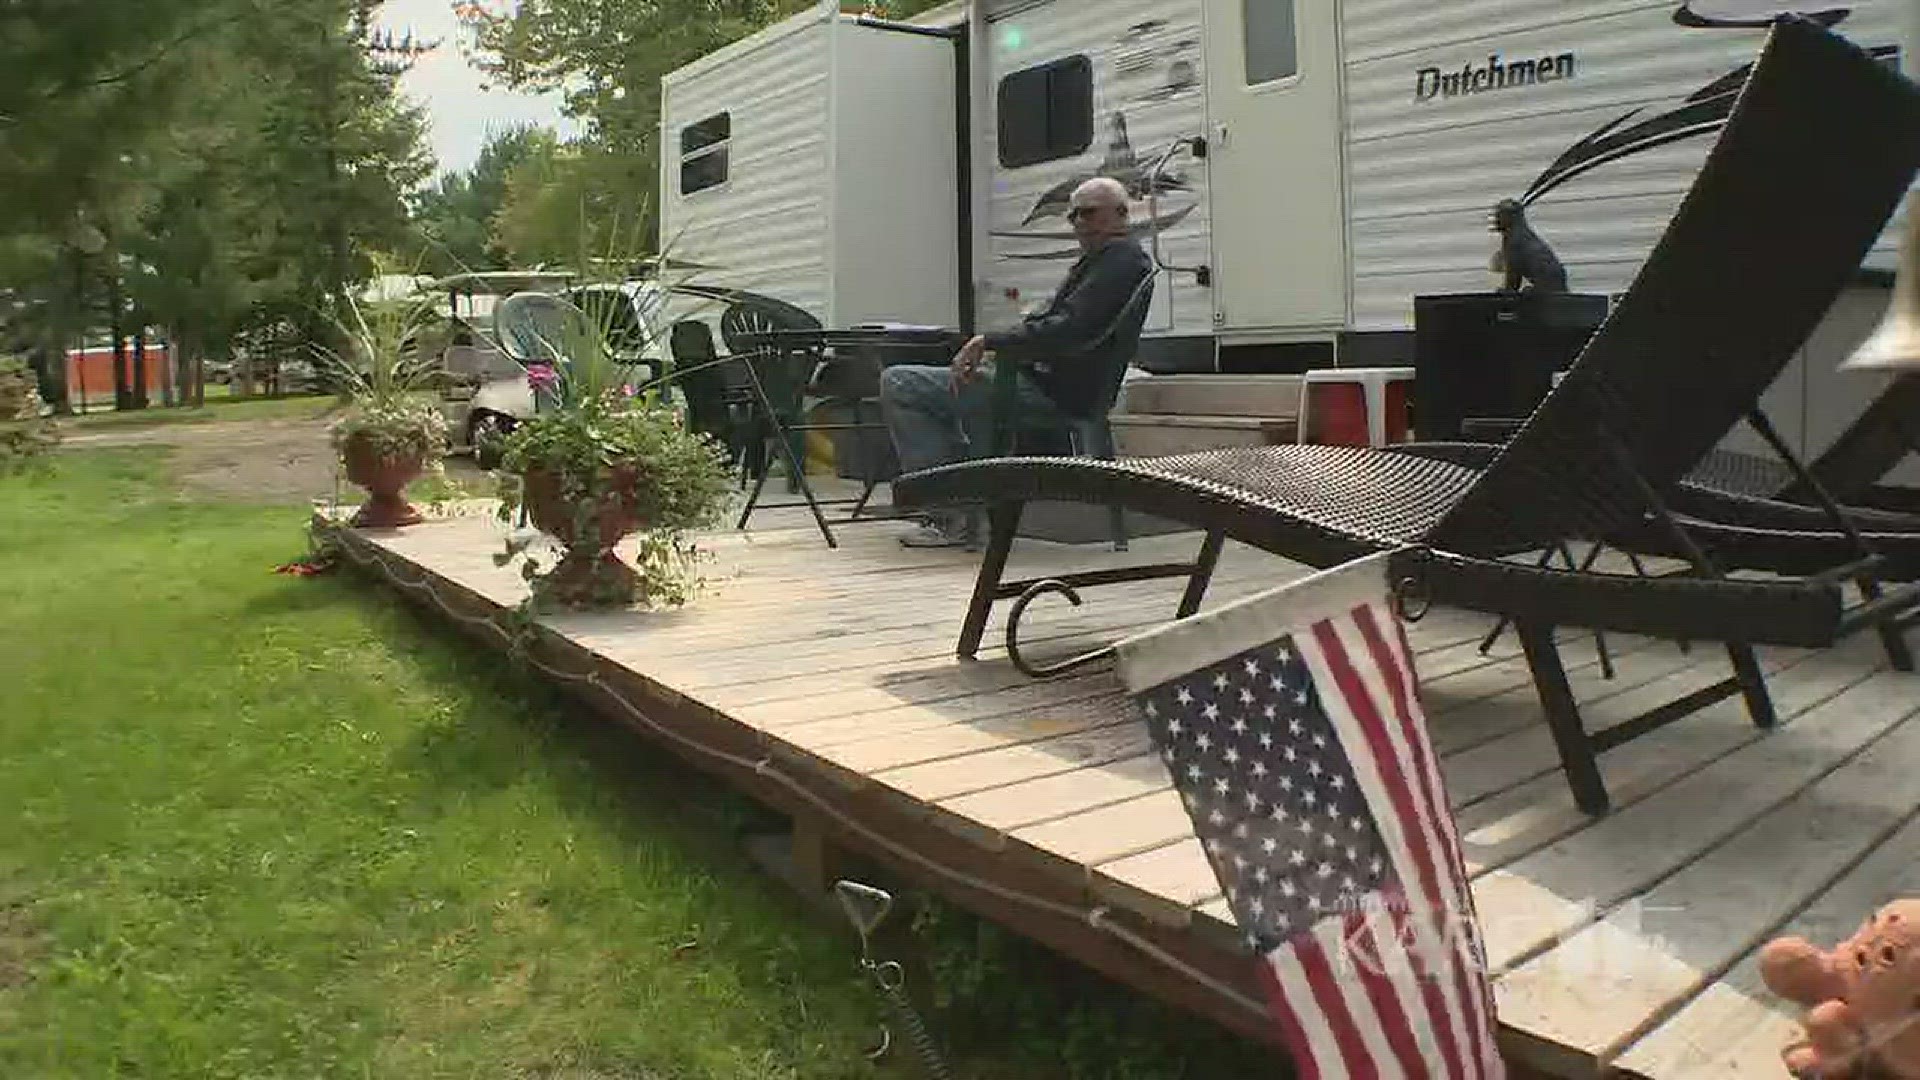 A Minnesota veteran says the Department of Veterans Affairs is wrongly refusing to pay for his emergency medical care leaving him saddled with the bill and alarming calls from debt collectors. http://kare11.tv/2wNcBLp